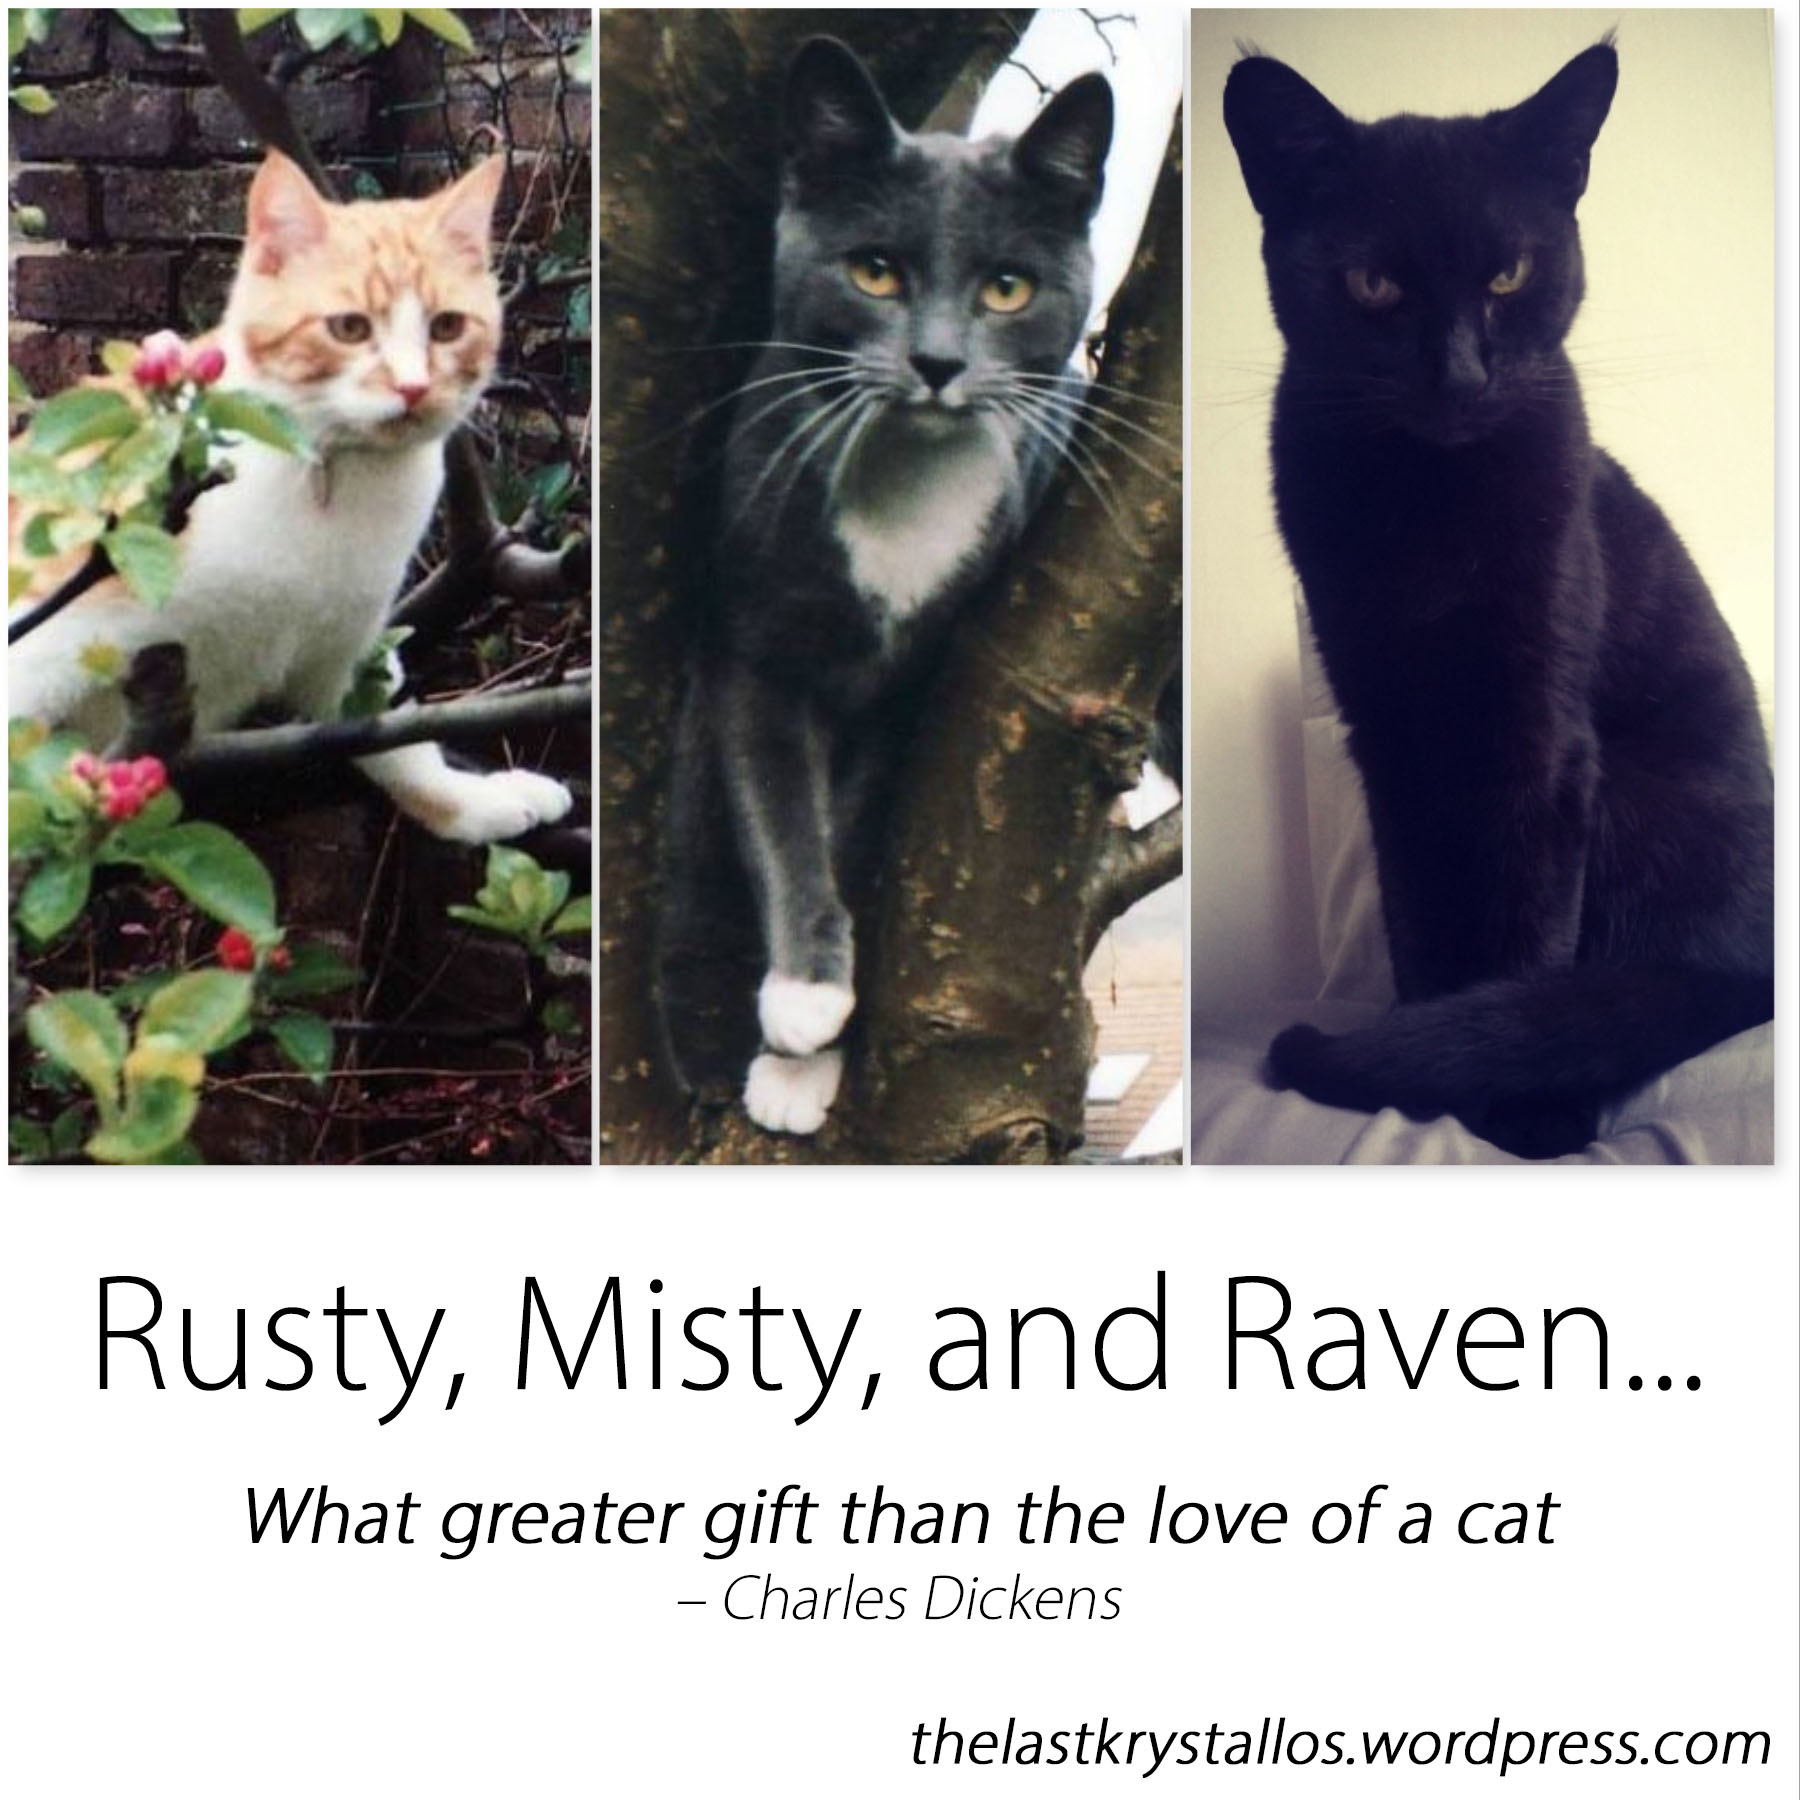 Rusty - ginger cat, Misty - grey cat, and Raven - black cat